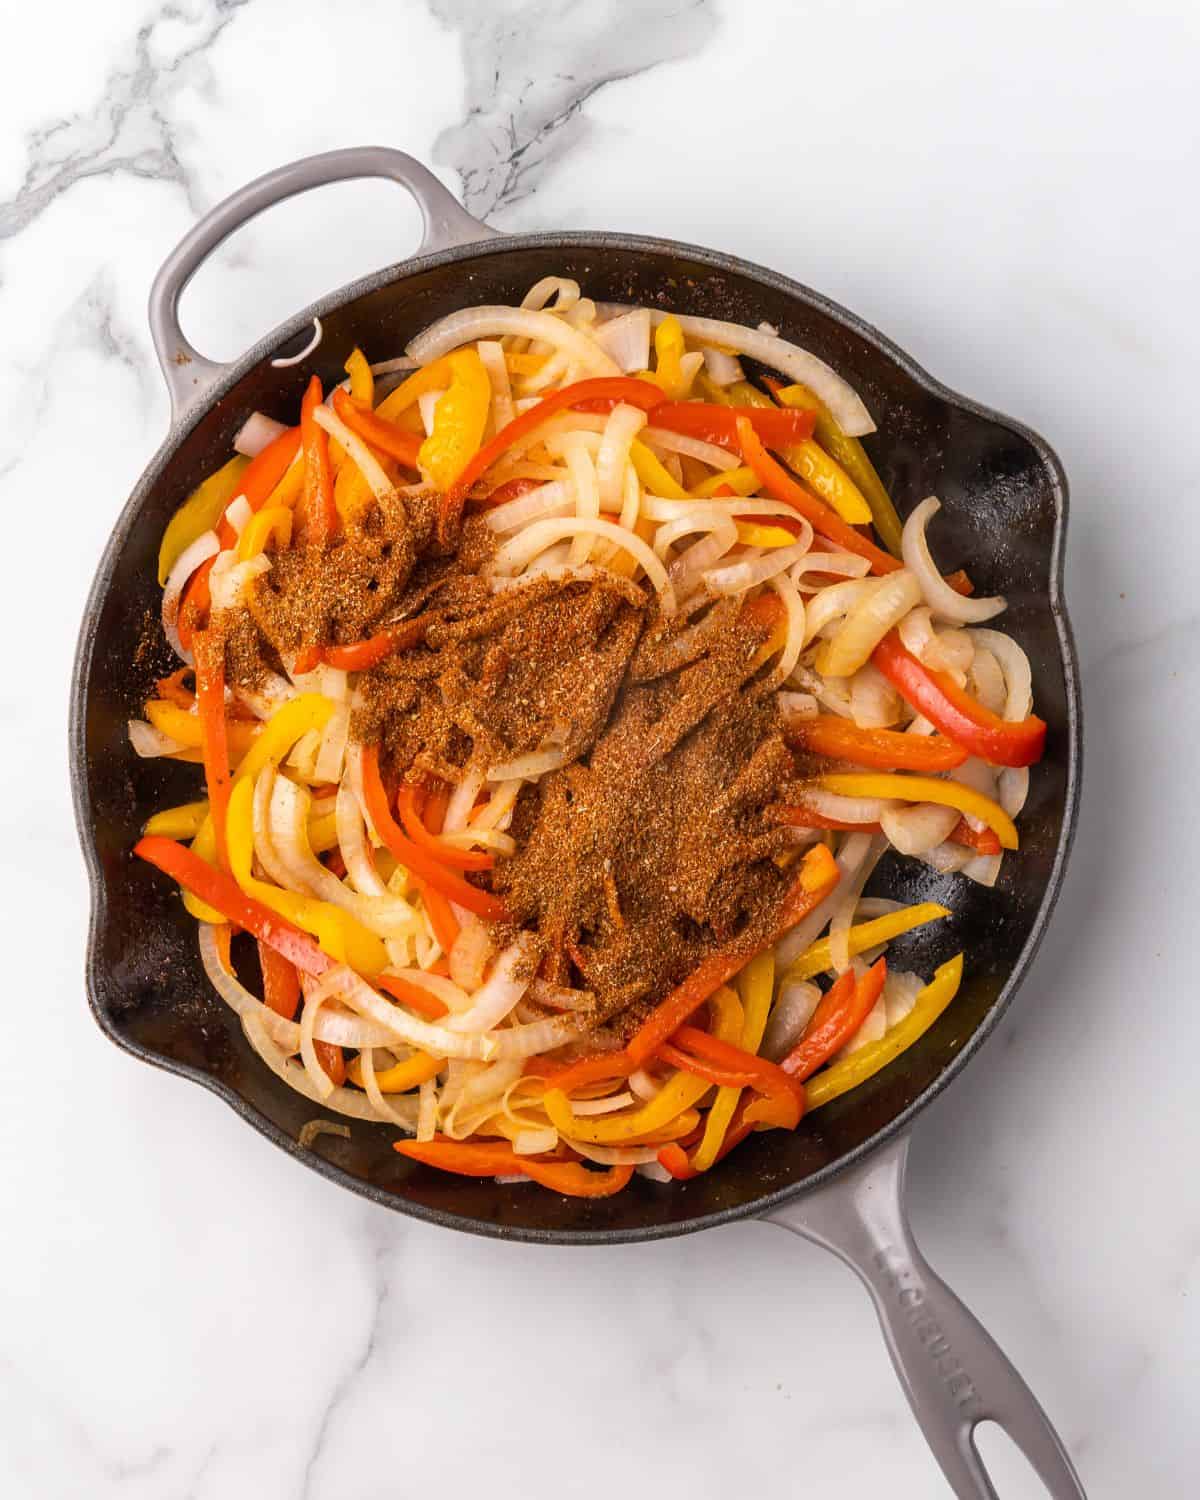 onions and peppers cooked in a skillet with fajita seasoning on top.